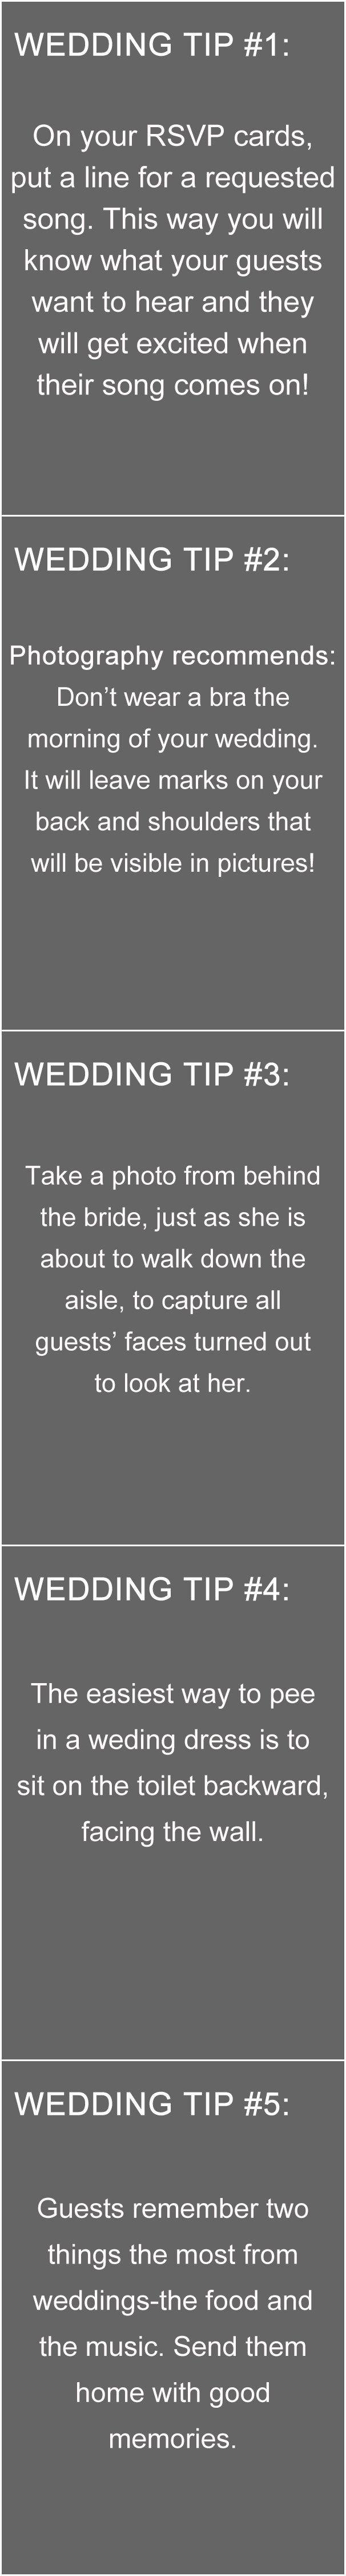 Wedding - 10 Must Read Wedding Tips Before Your Wedding Day